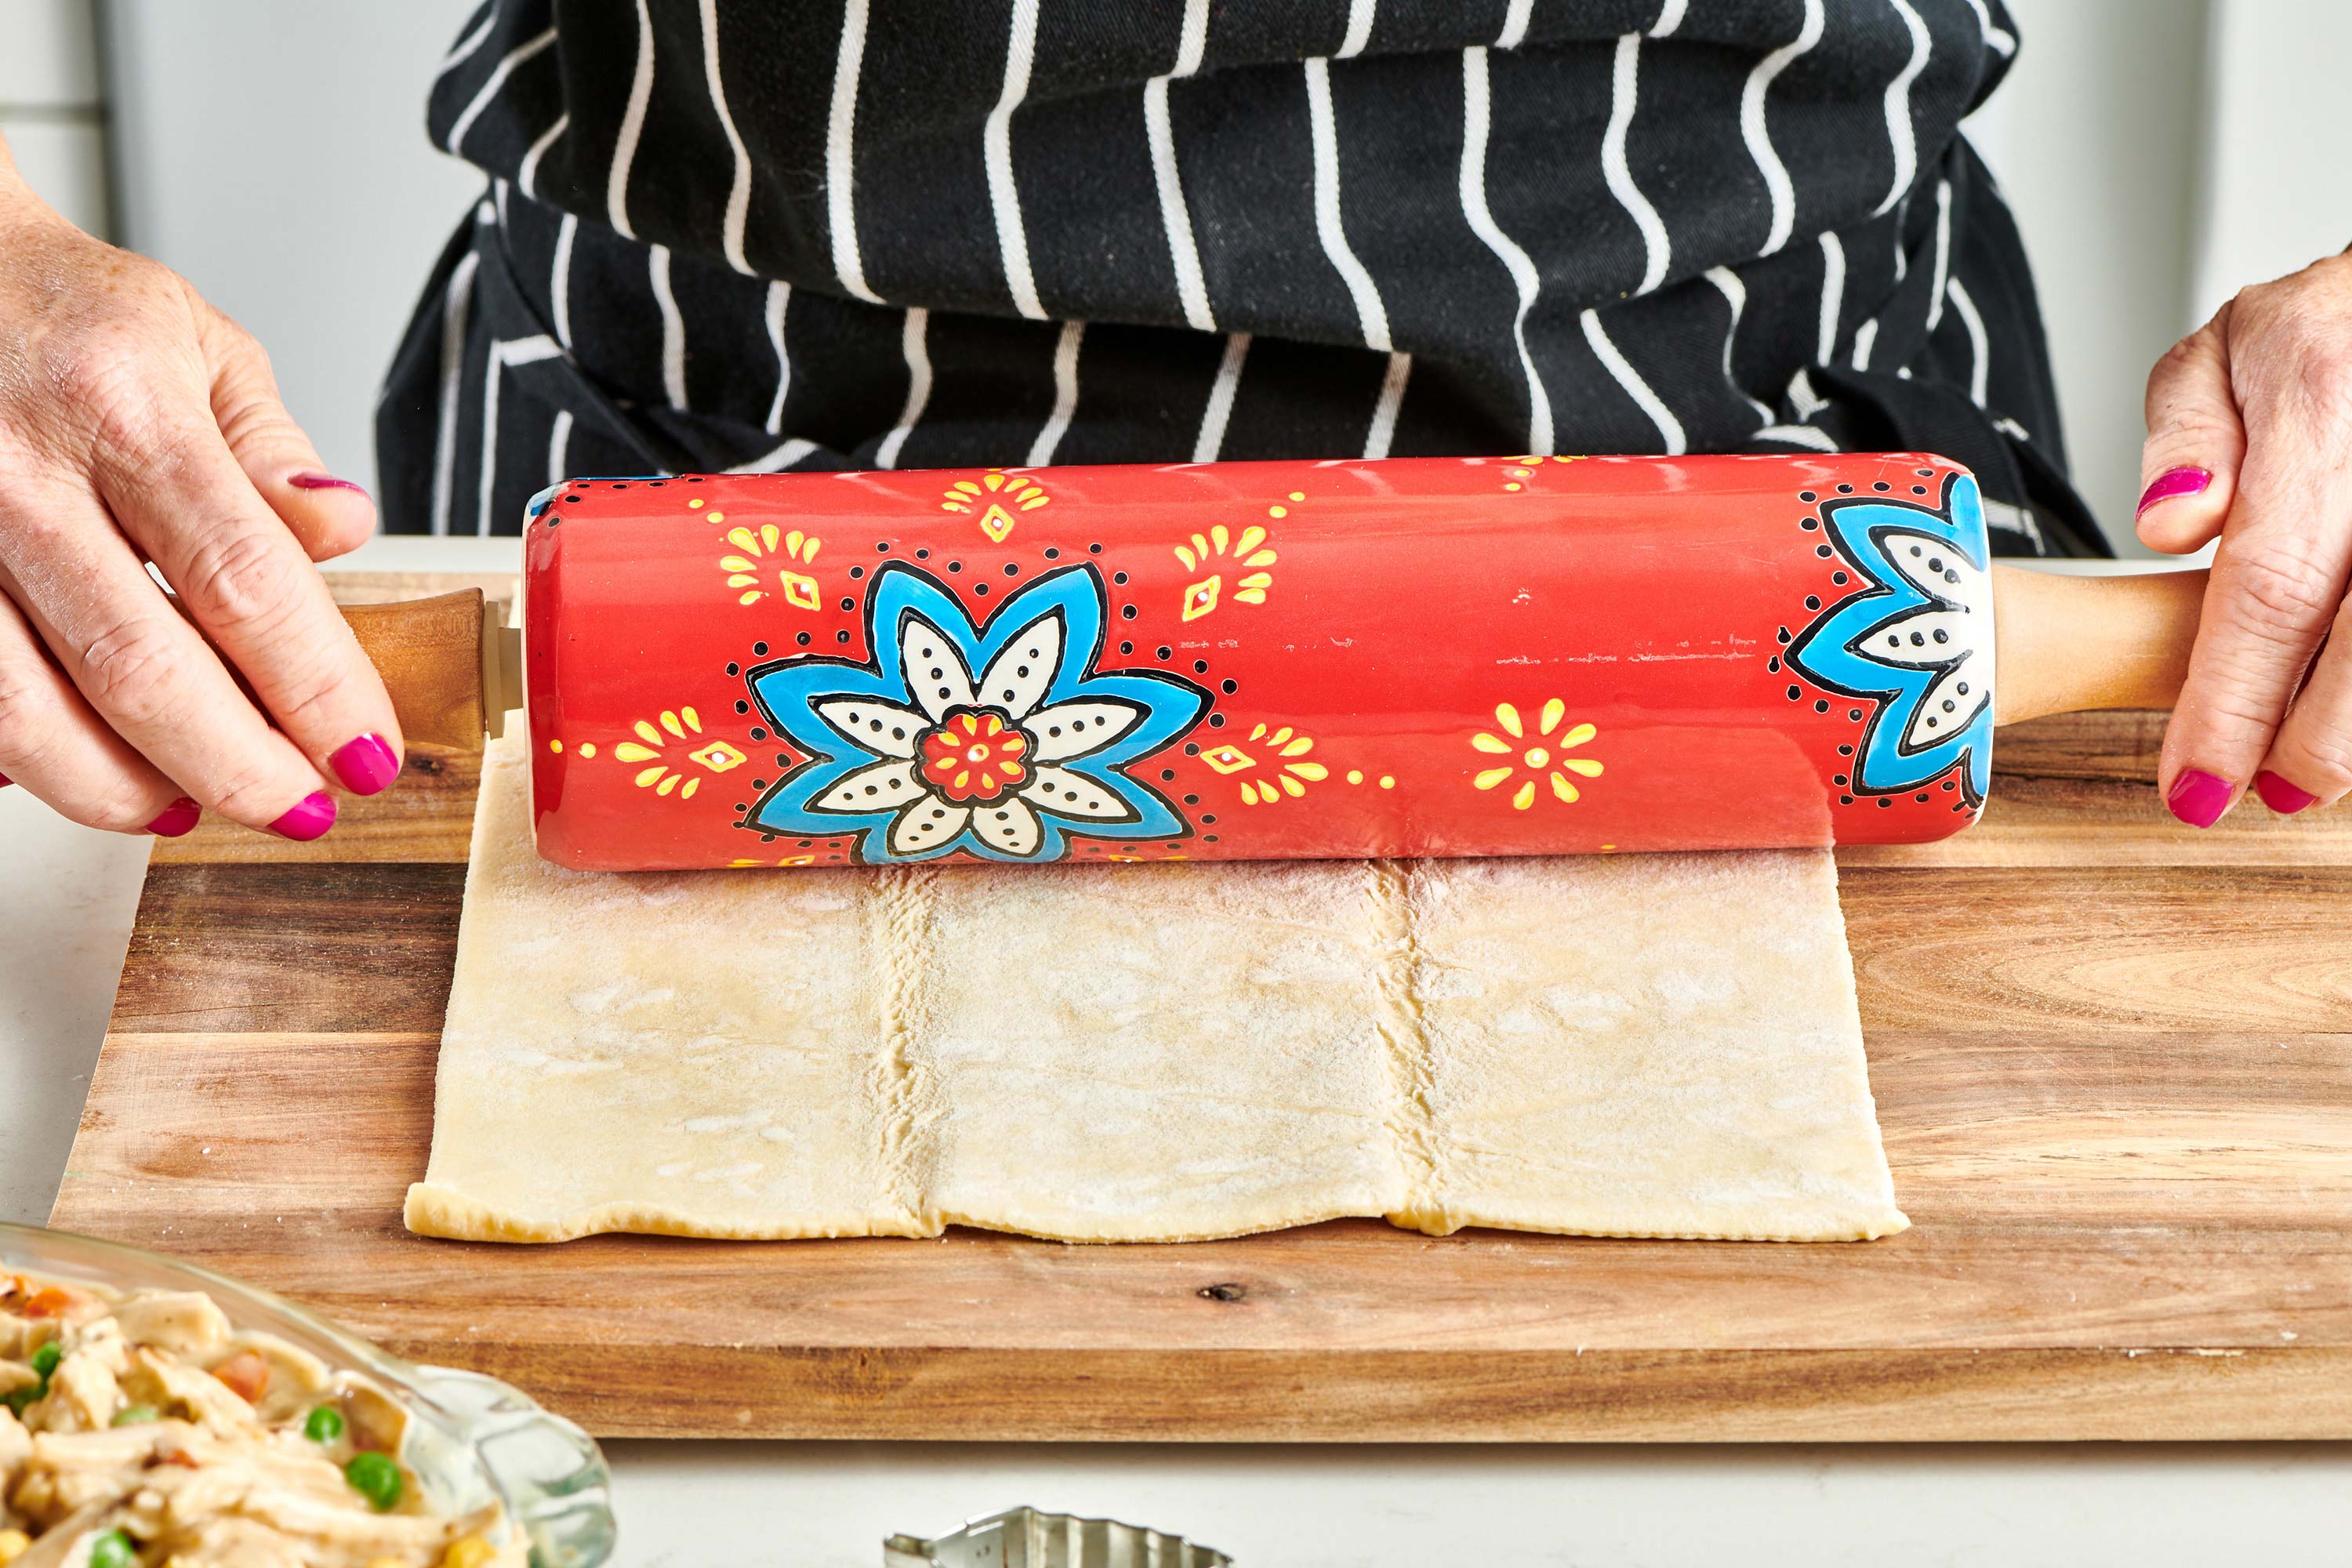 Woman rolling puff pastry sheet on cutting board.